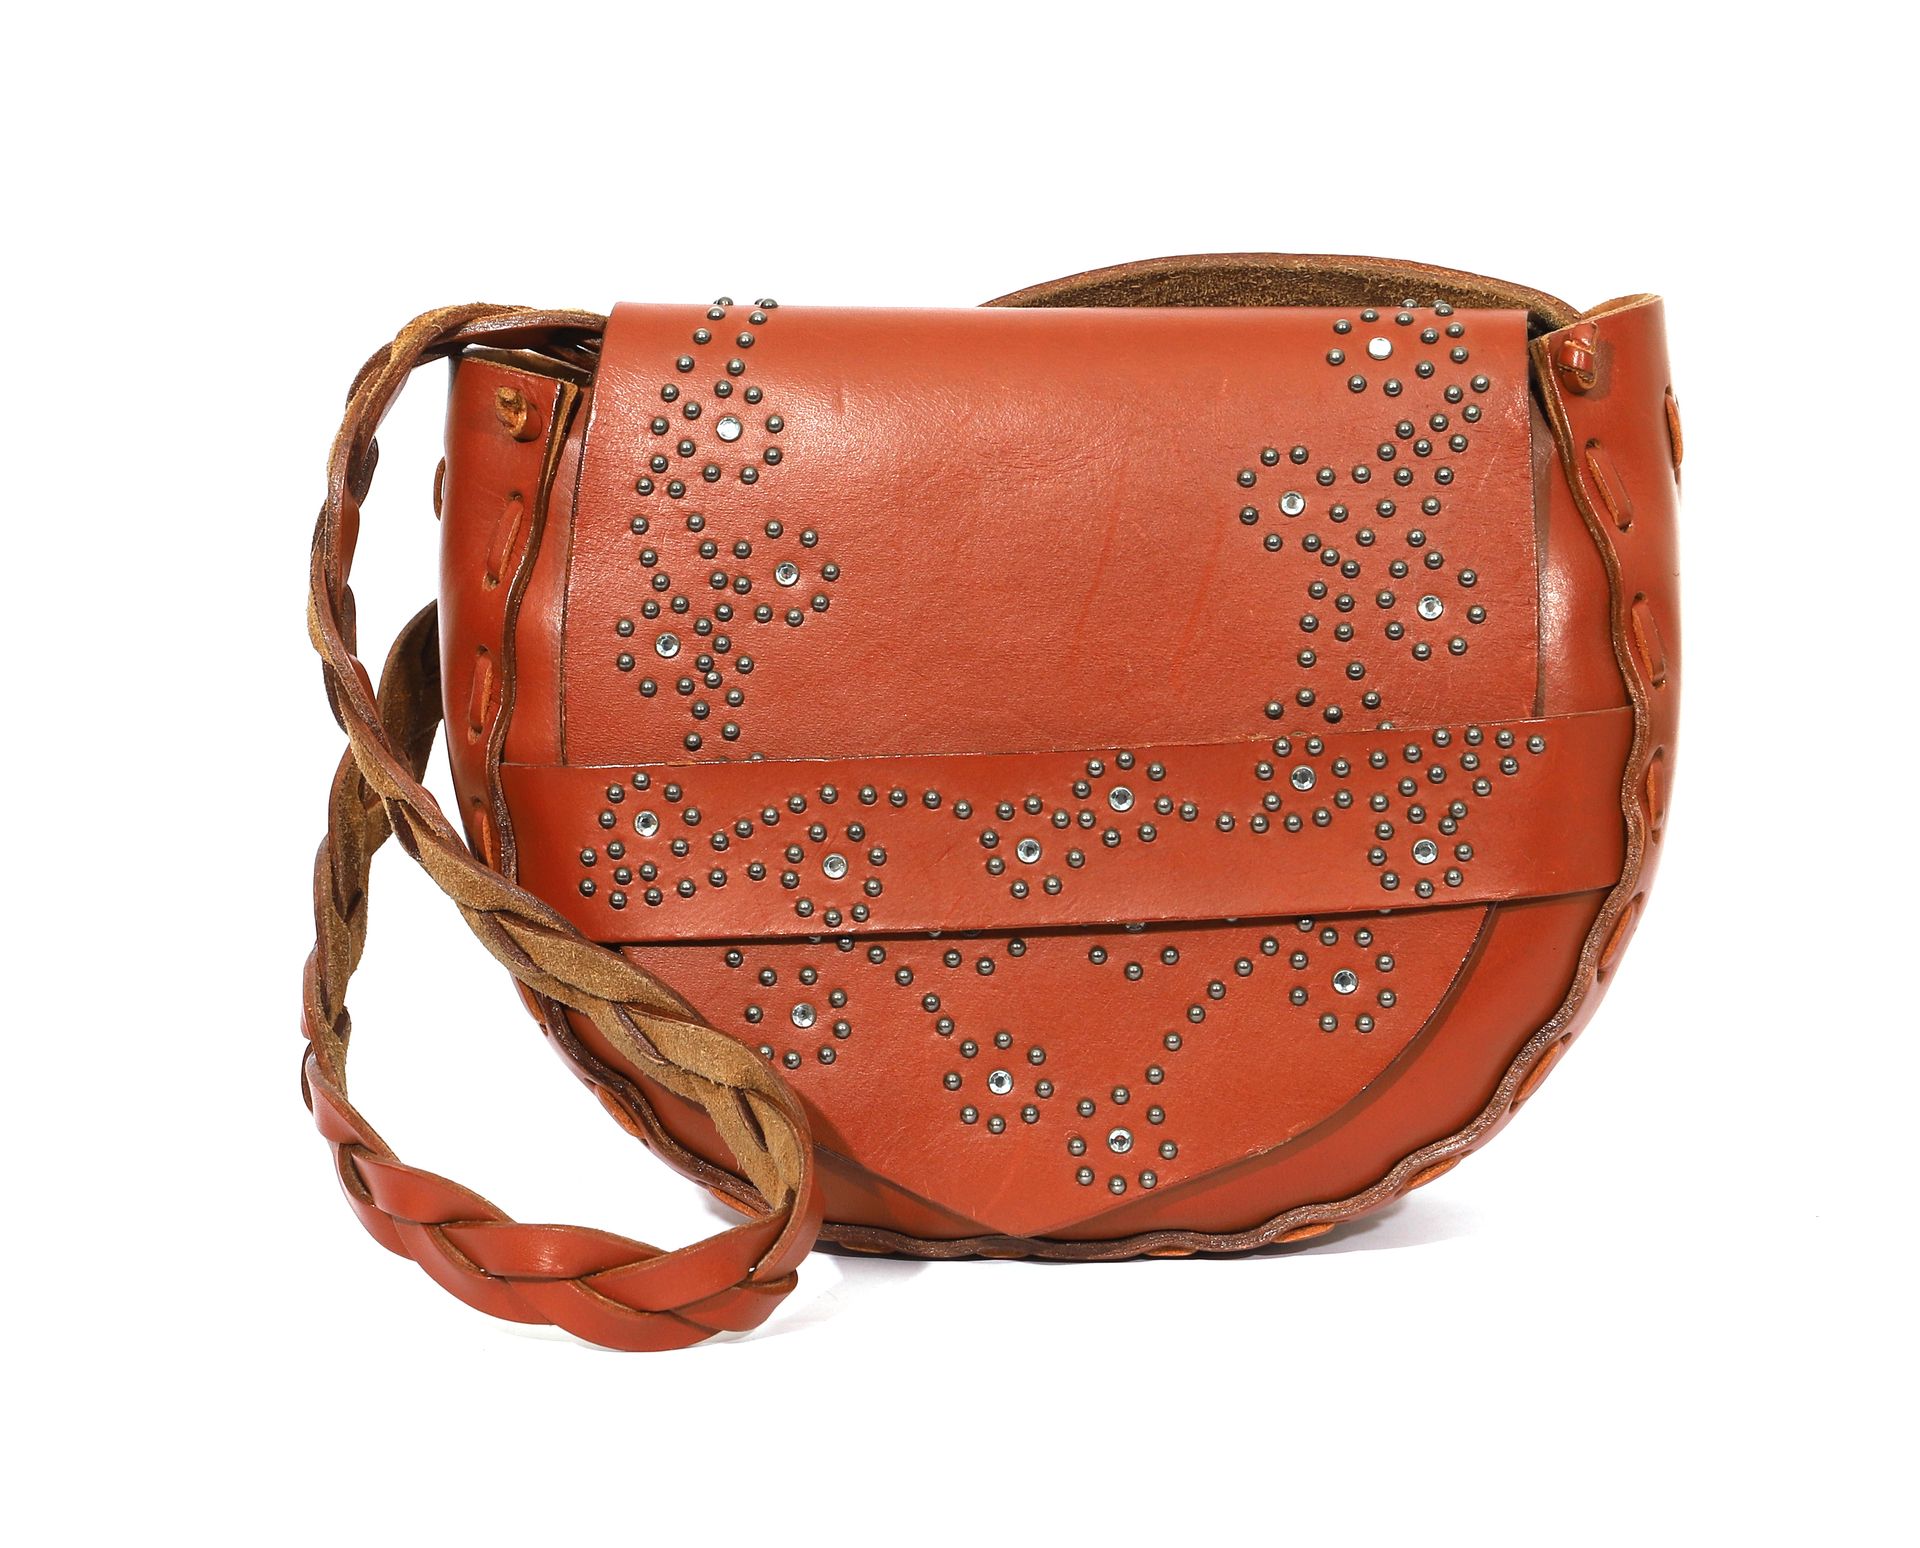 Null Kathleen Madden Bag

Camel leather, studded decoration and braided handle.
&hellip;